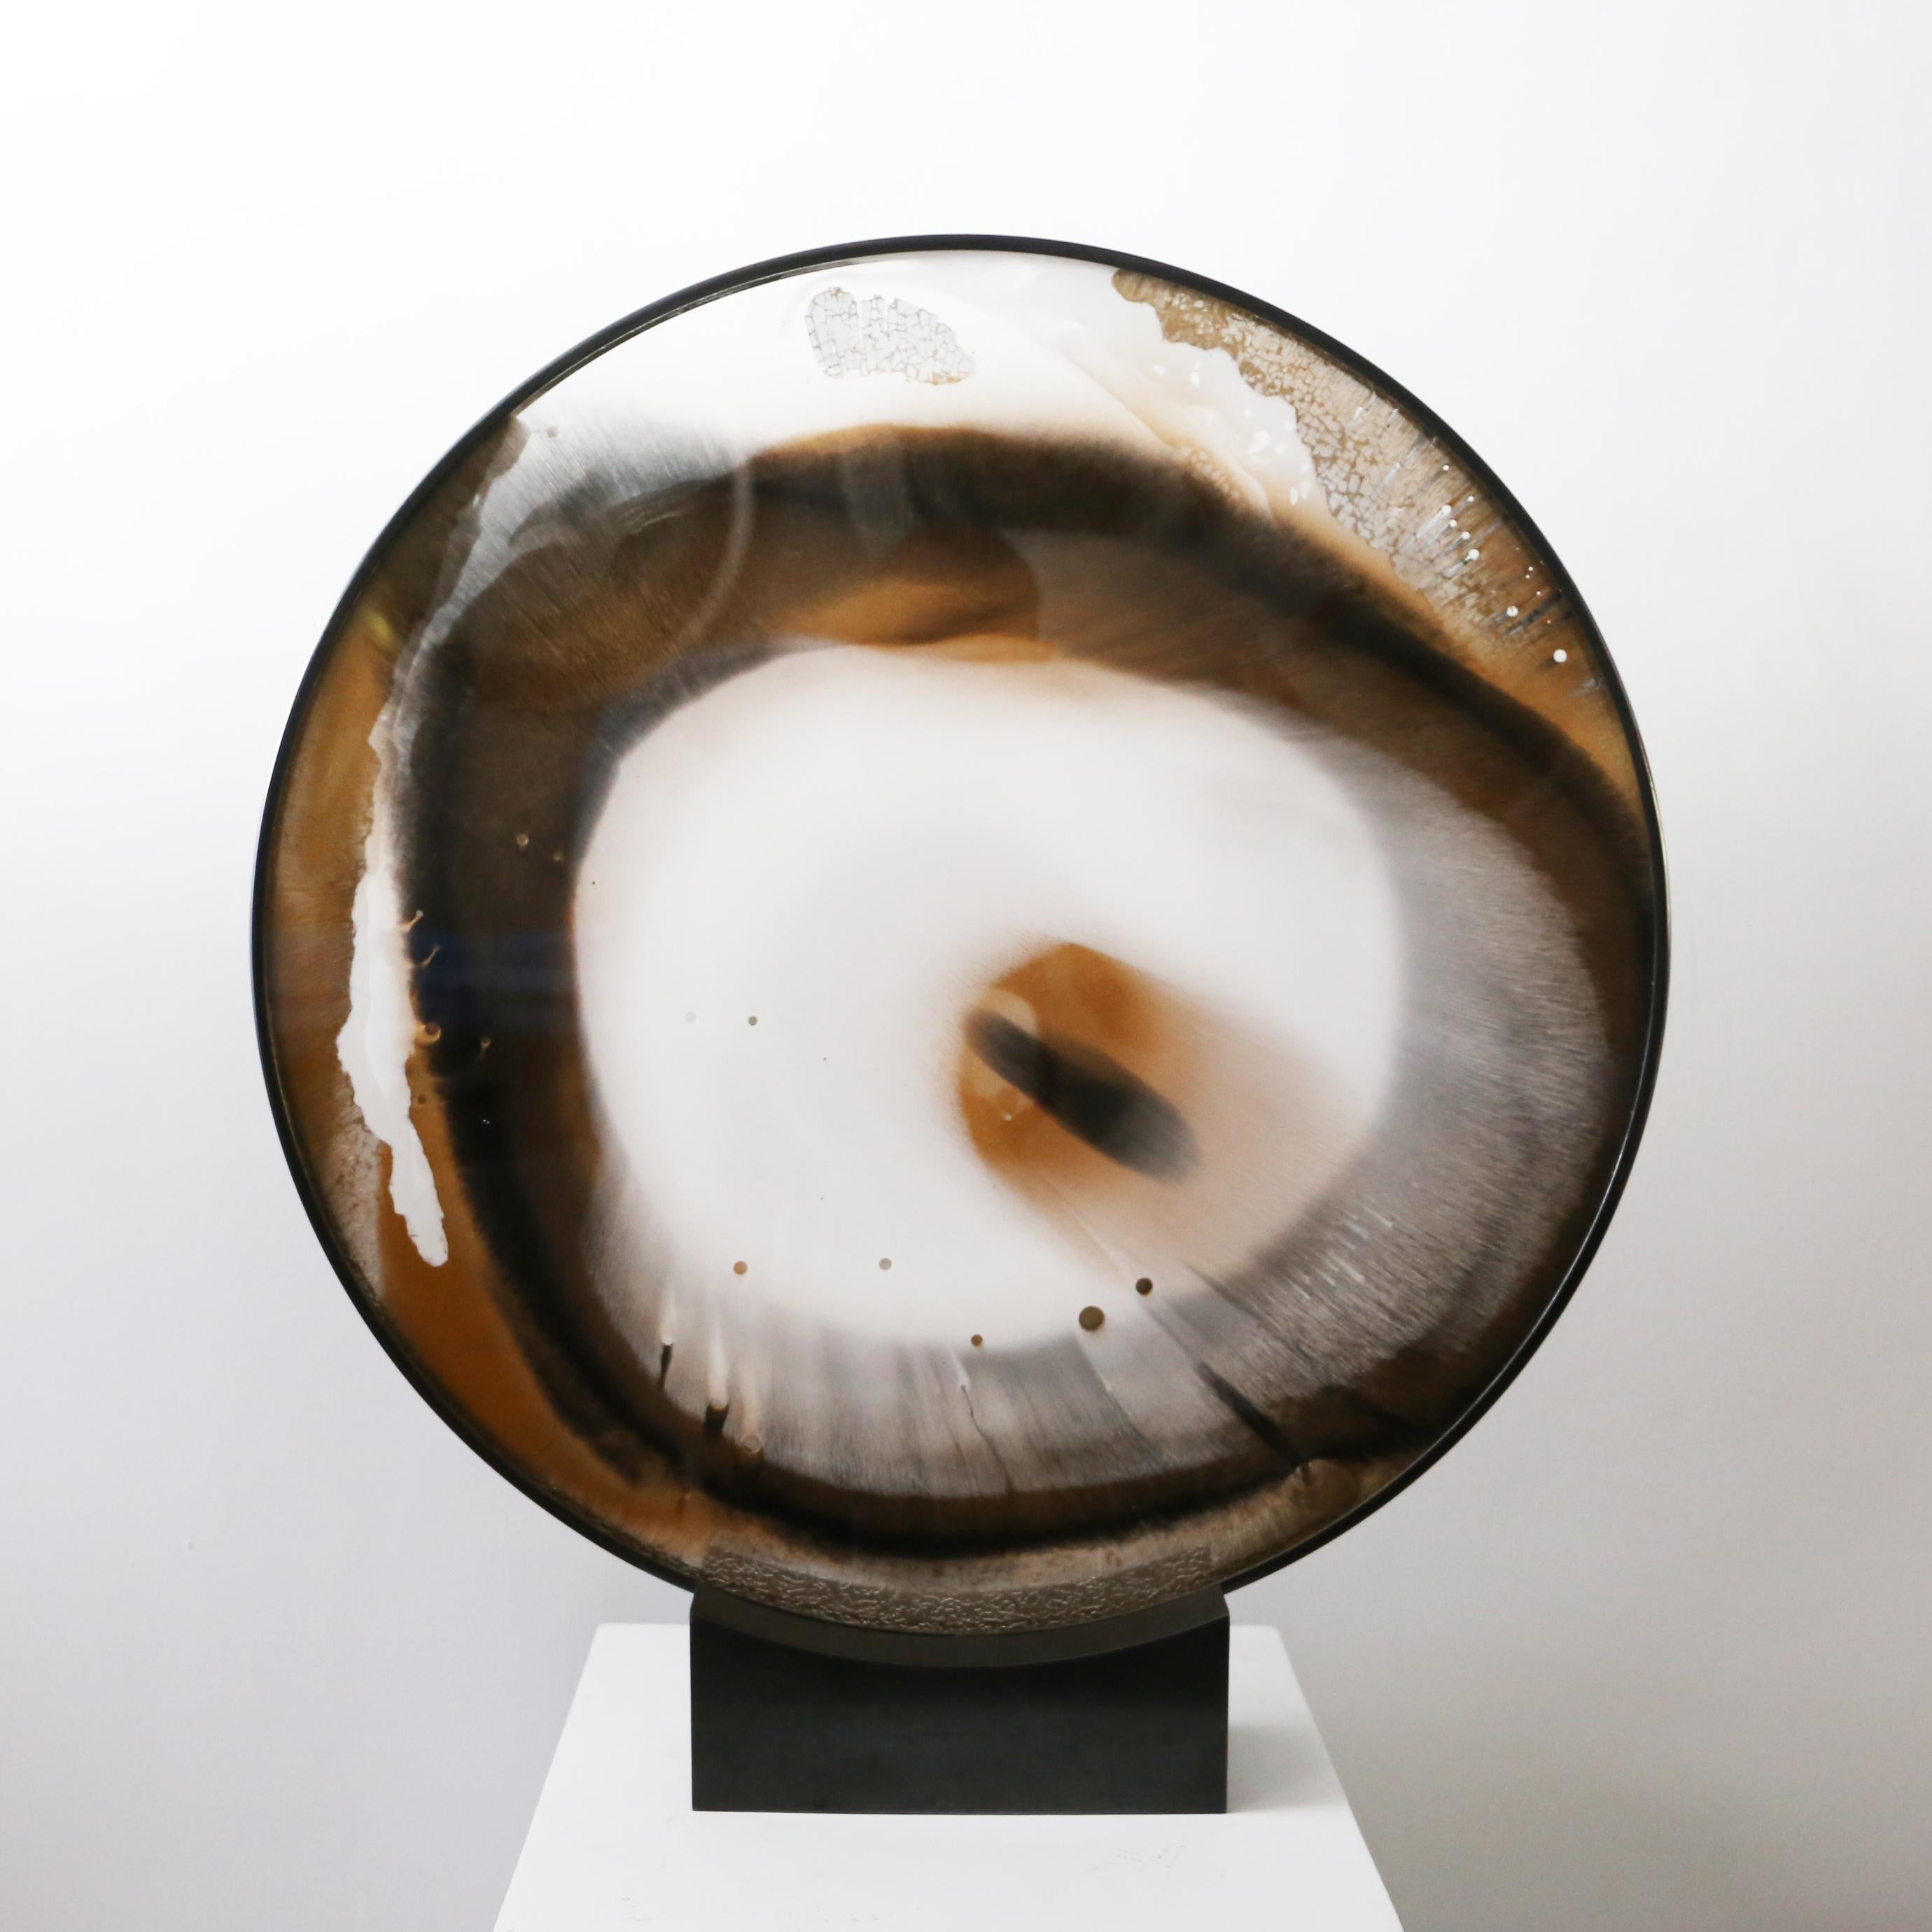 Eye of Equanimity, a Free Standing black & gold Sculpture by Yorgos Papadopoulos 2